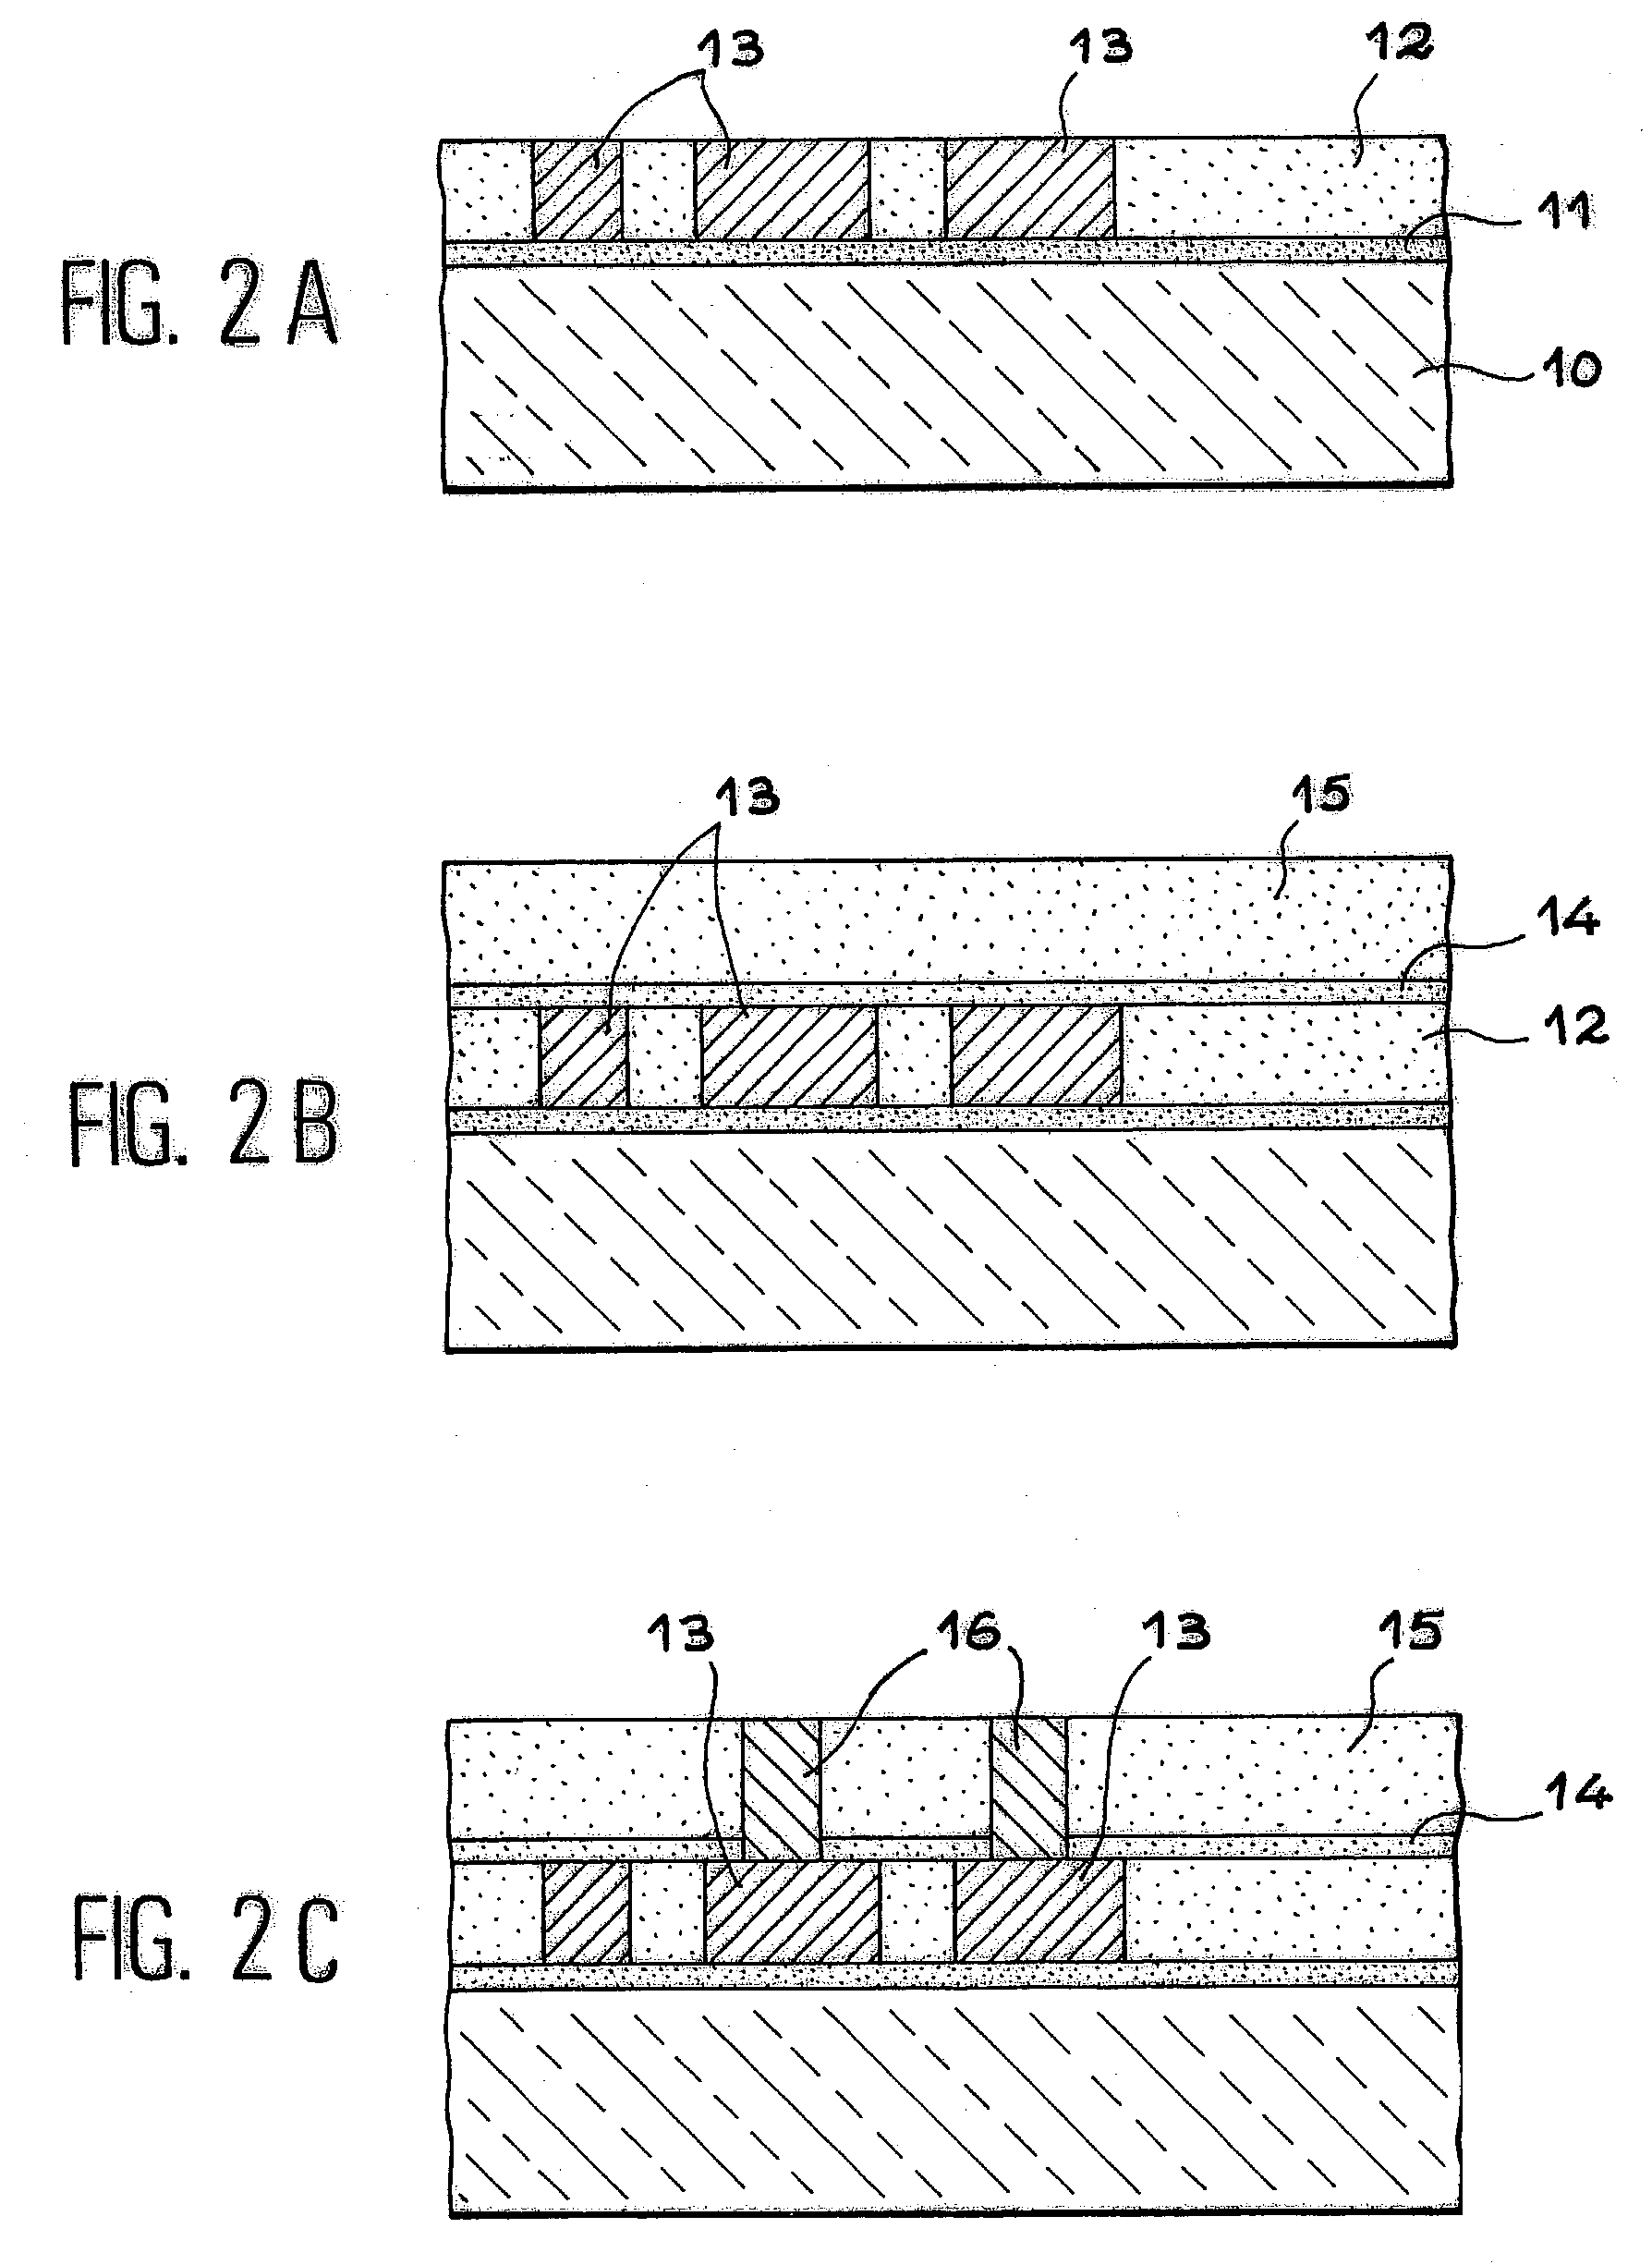 Interconnection structure with insulation comprising cavities